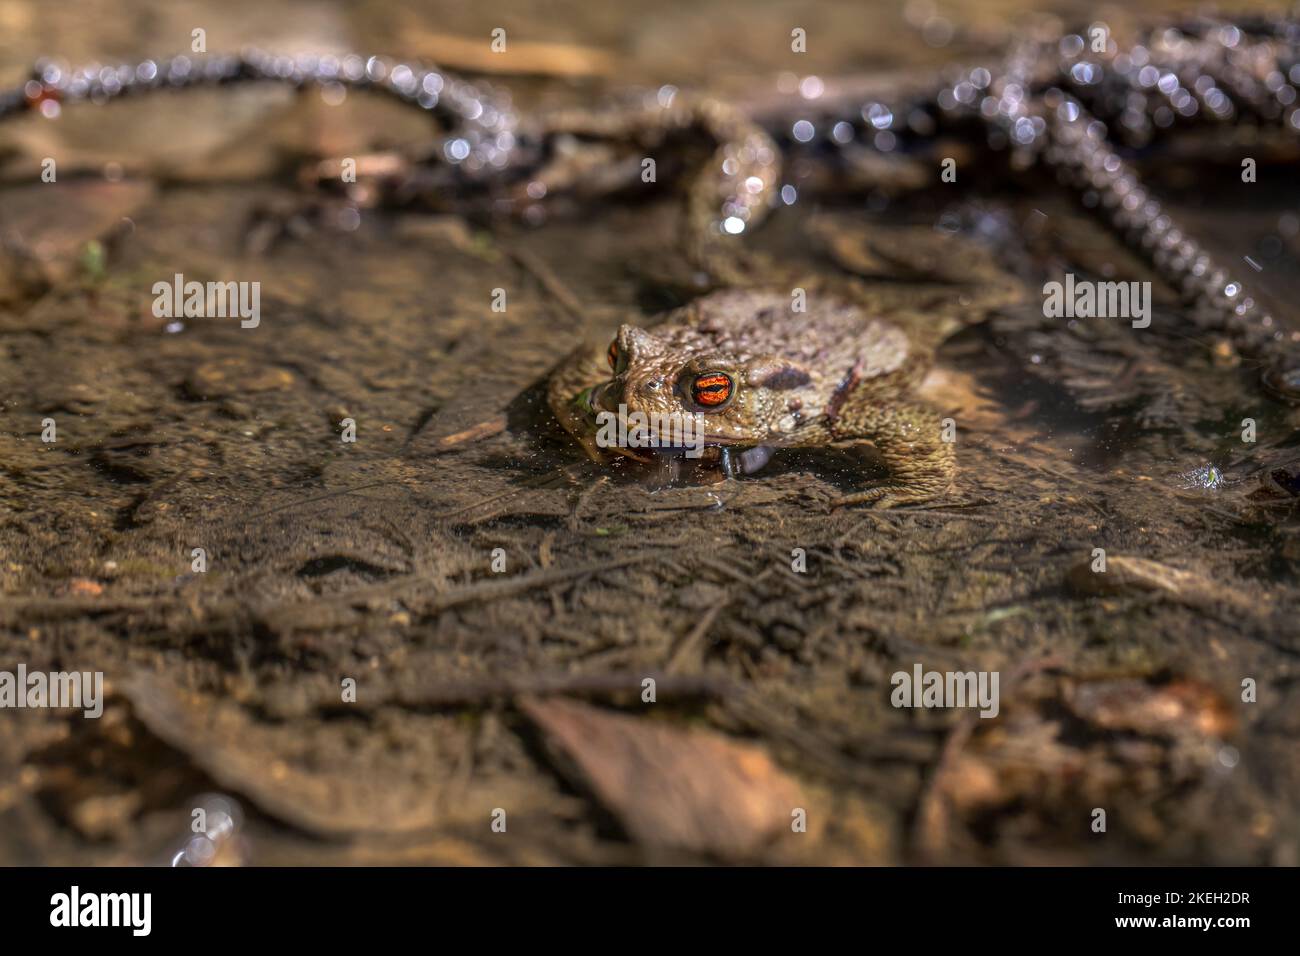 Portrait of a tiny Frog Stock Photo